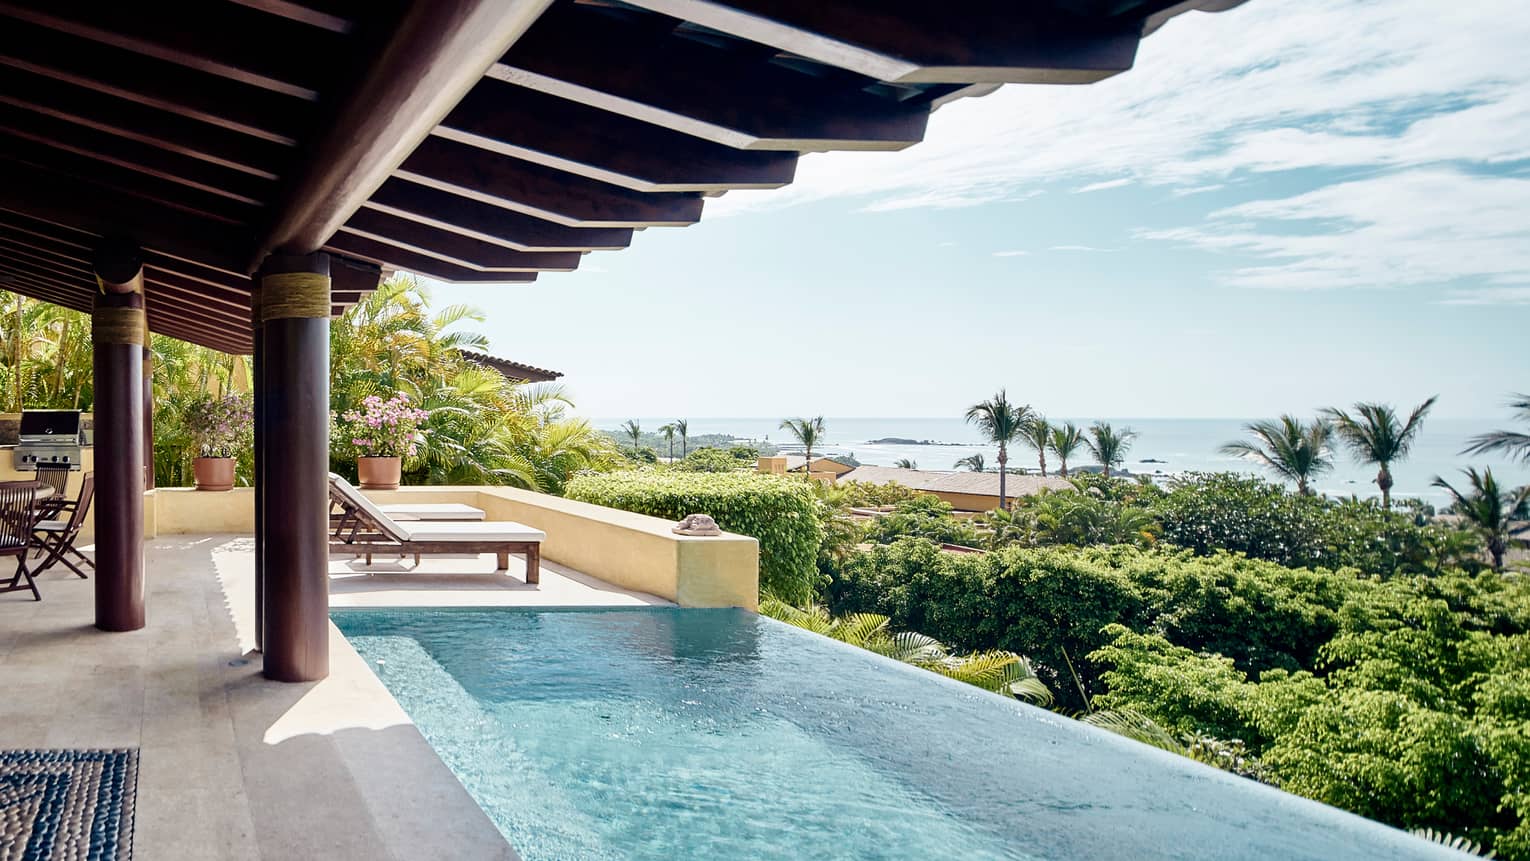 Savour the year-round sunshine by your private pool, with privileged ocean views in every direction